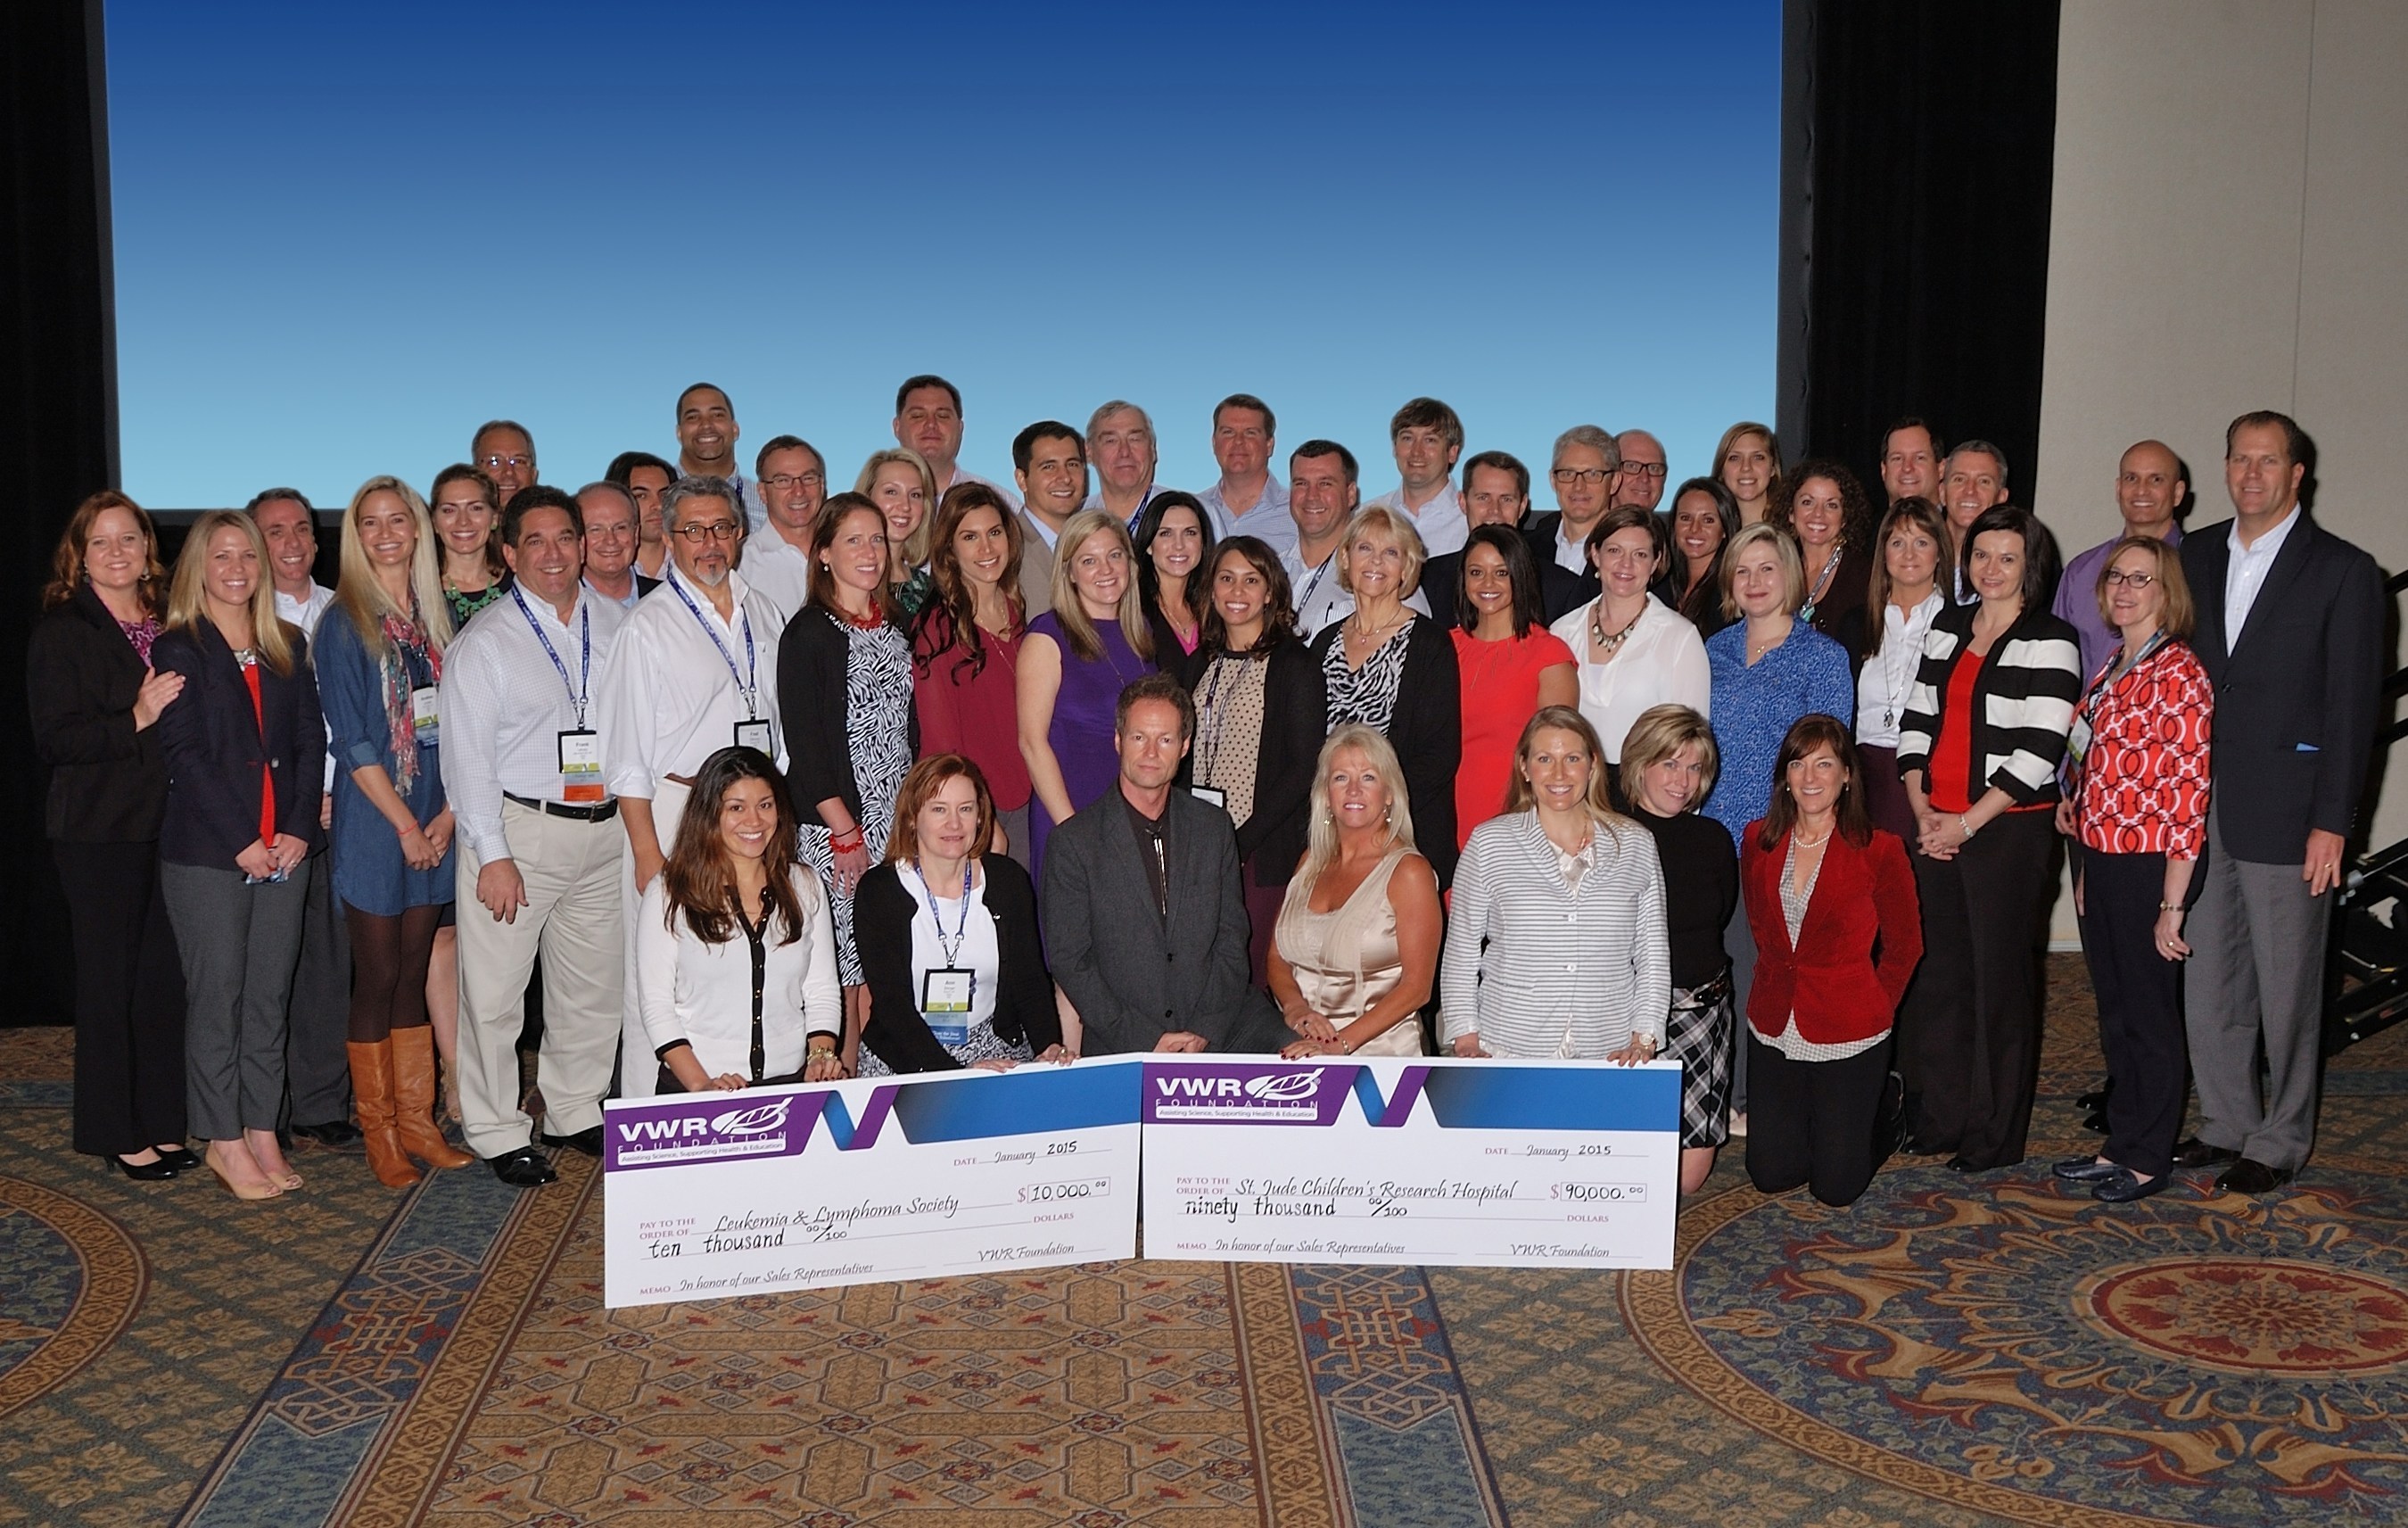 The VWR Foundation Donated Dollars in Honor of the VWR's Sales Force.  The recipients of the donations are St. Jude Children's Research Hospital for $90,000 and Leukemia & Lymphoma Society for $10,000.